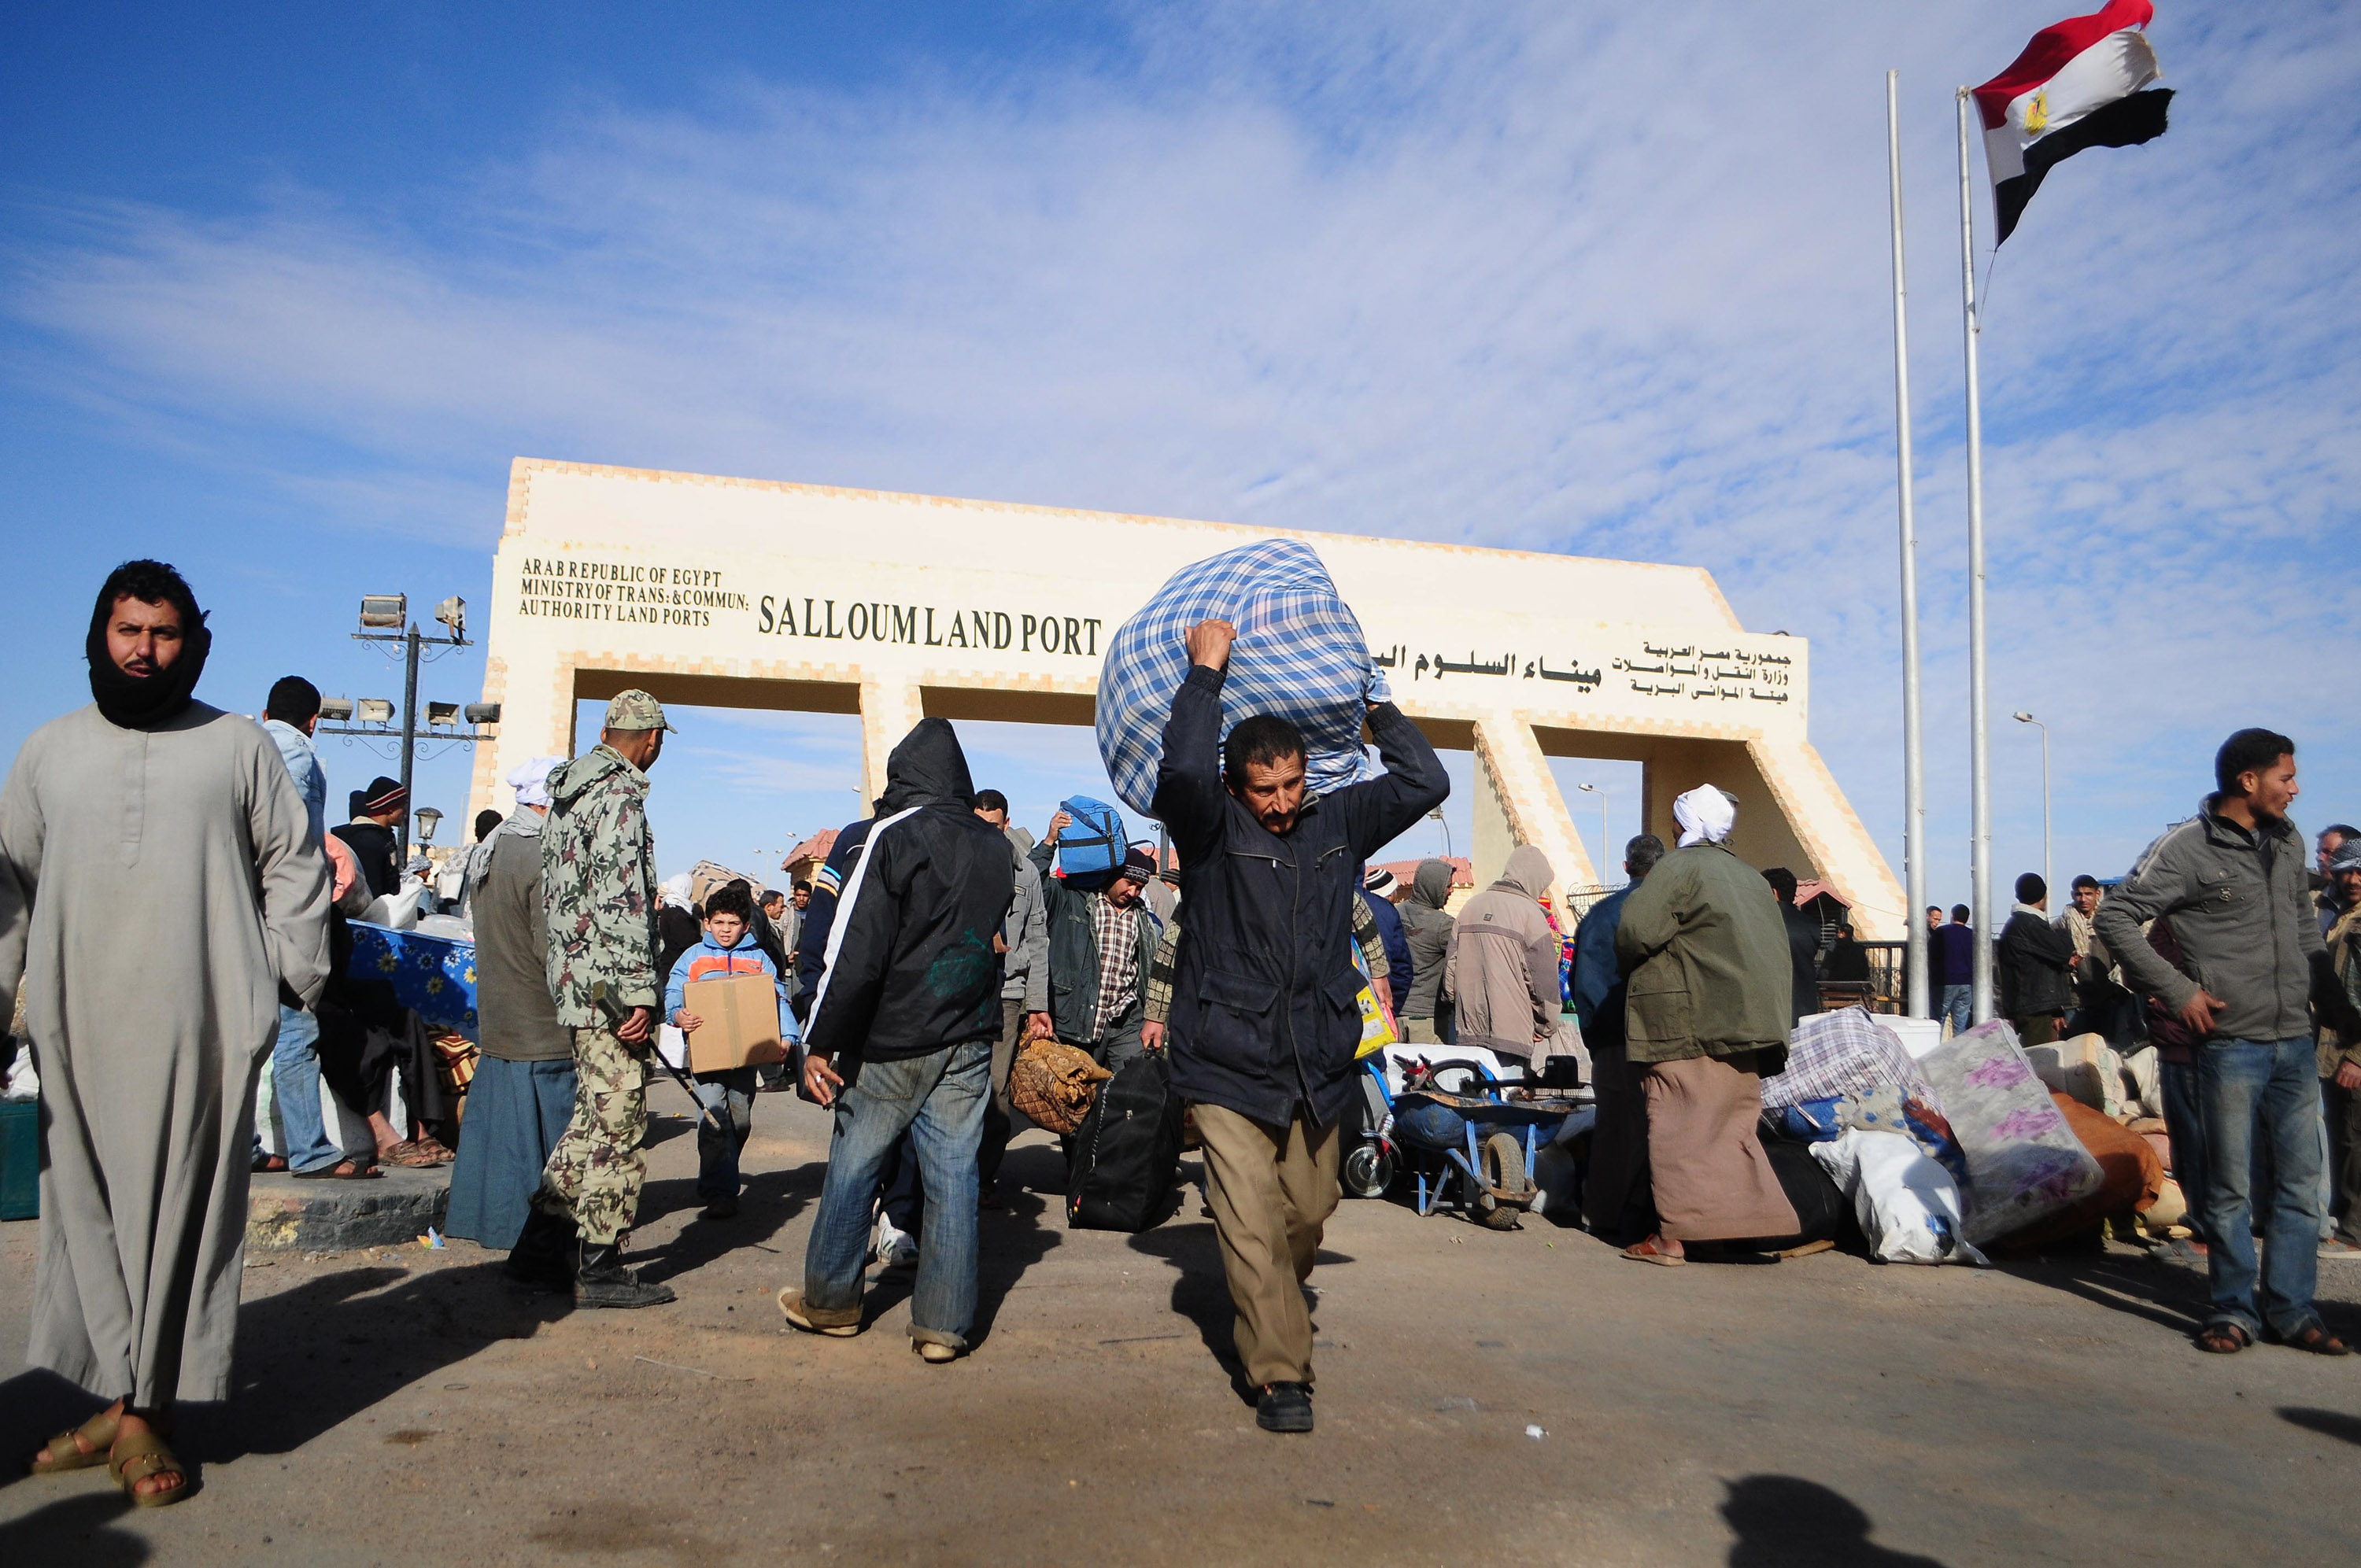 Egyptians carry their belongings as they transit the Sallum border crossing with Libya on February 23, 2011. Photo: Tarek Elframawy